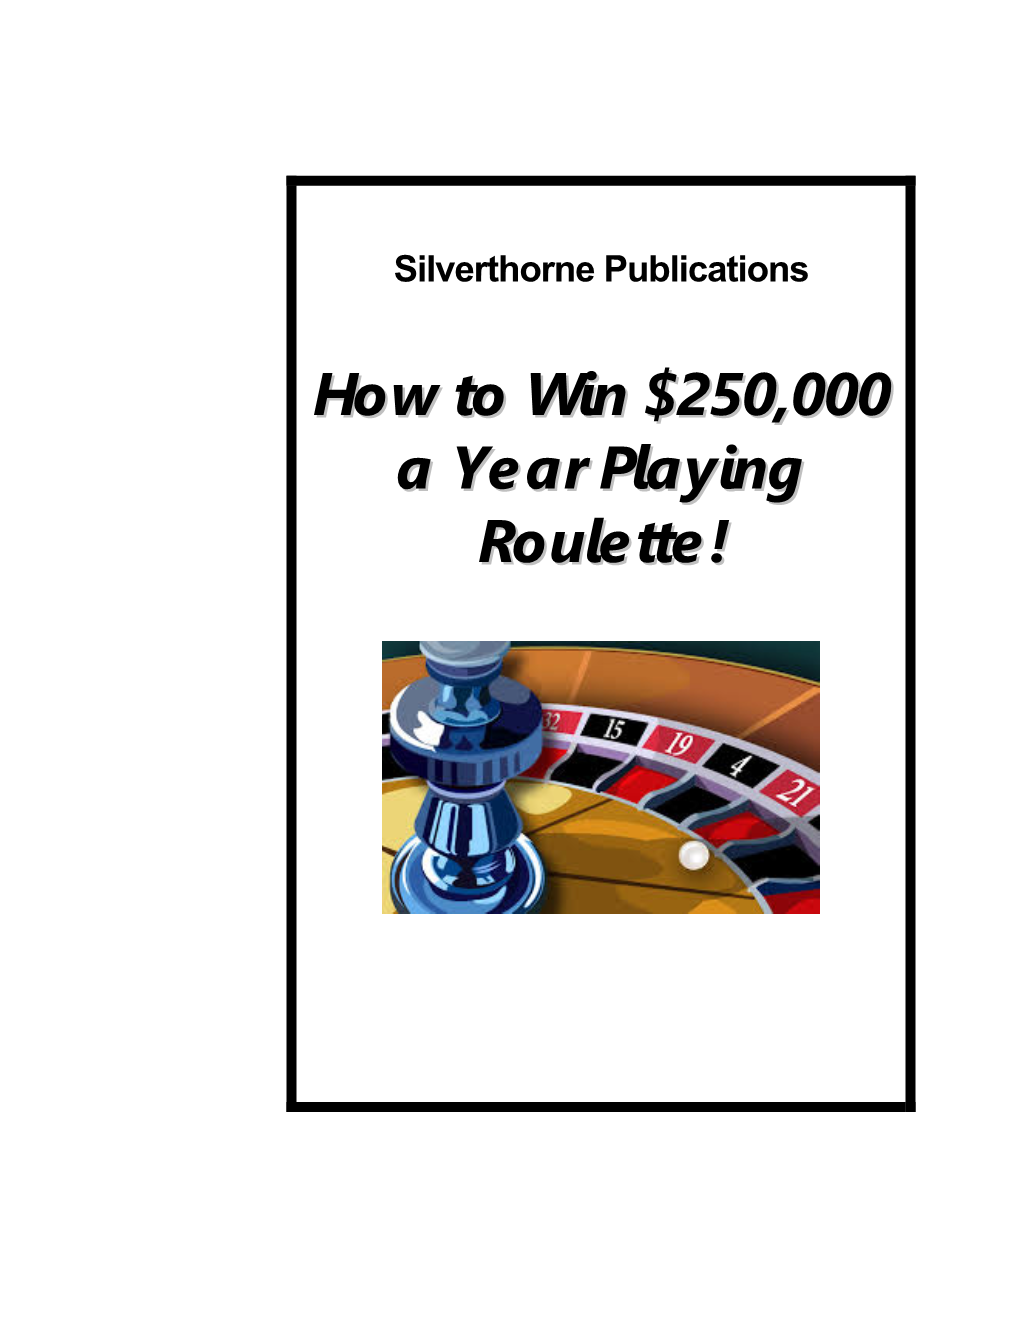 How to Win $250,000 a Year Playing Roulette! COPYRIGHT © 2017 by Silverthorne Publications Inc